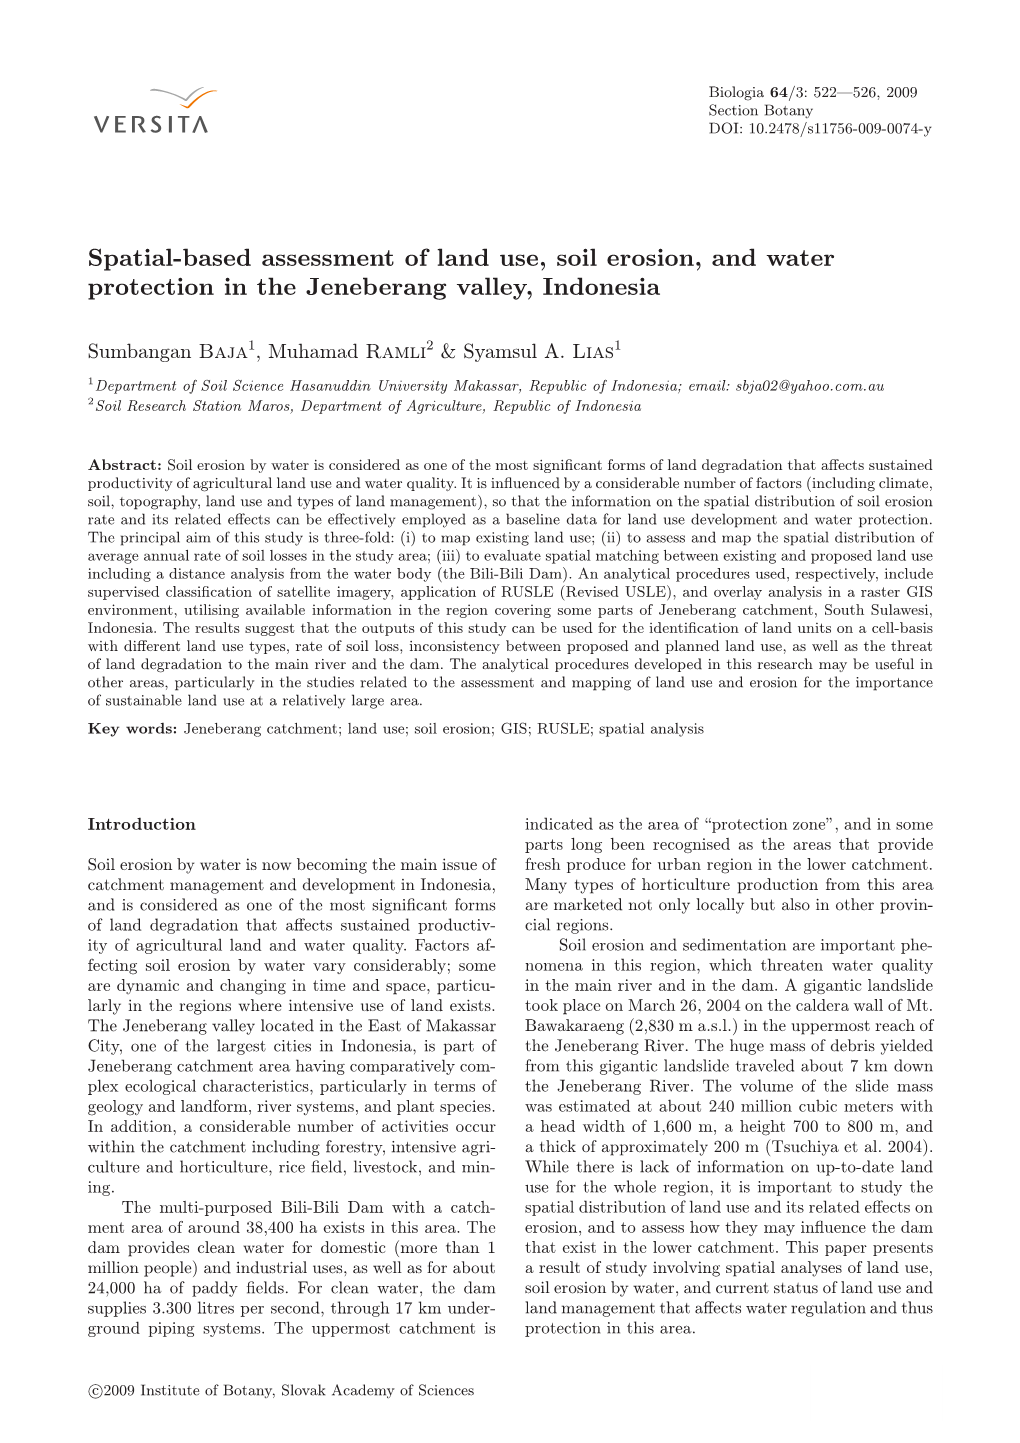 Spatial-Based Assessment of Land Use, Soil Erosion, and Water Protection in the Jeneberang Valley, Indonesia